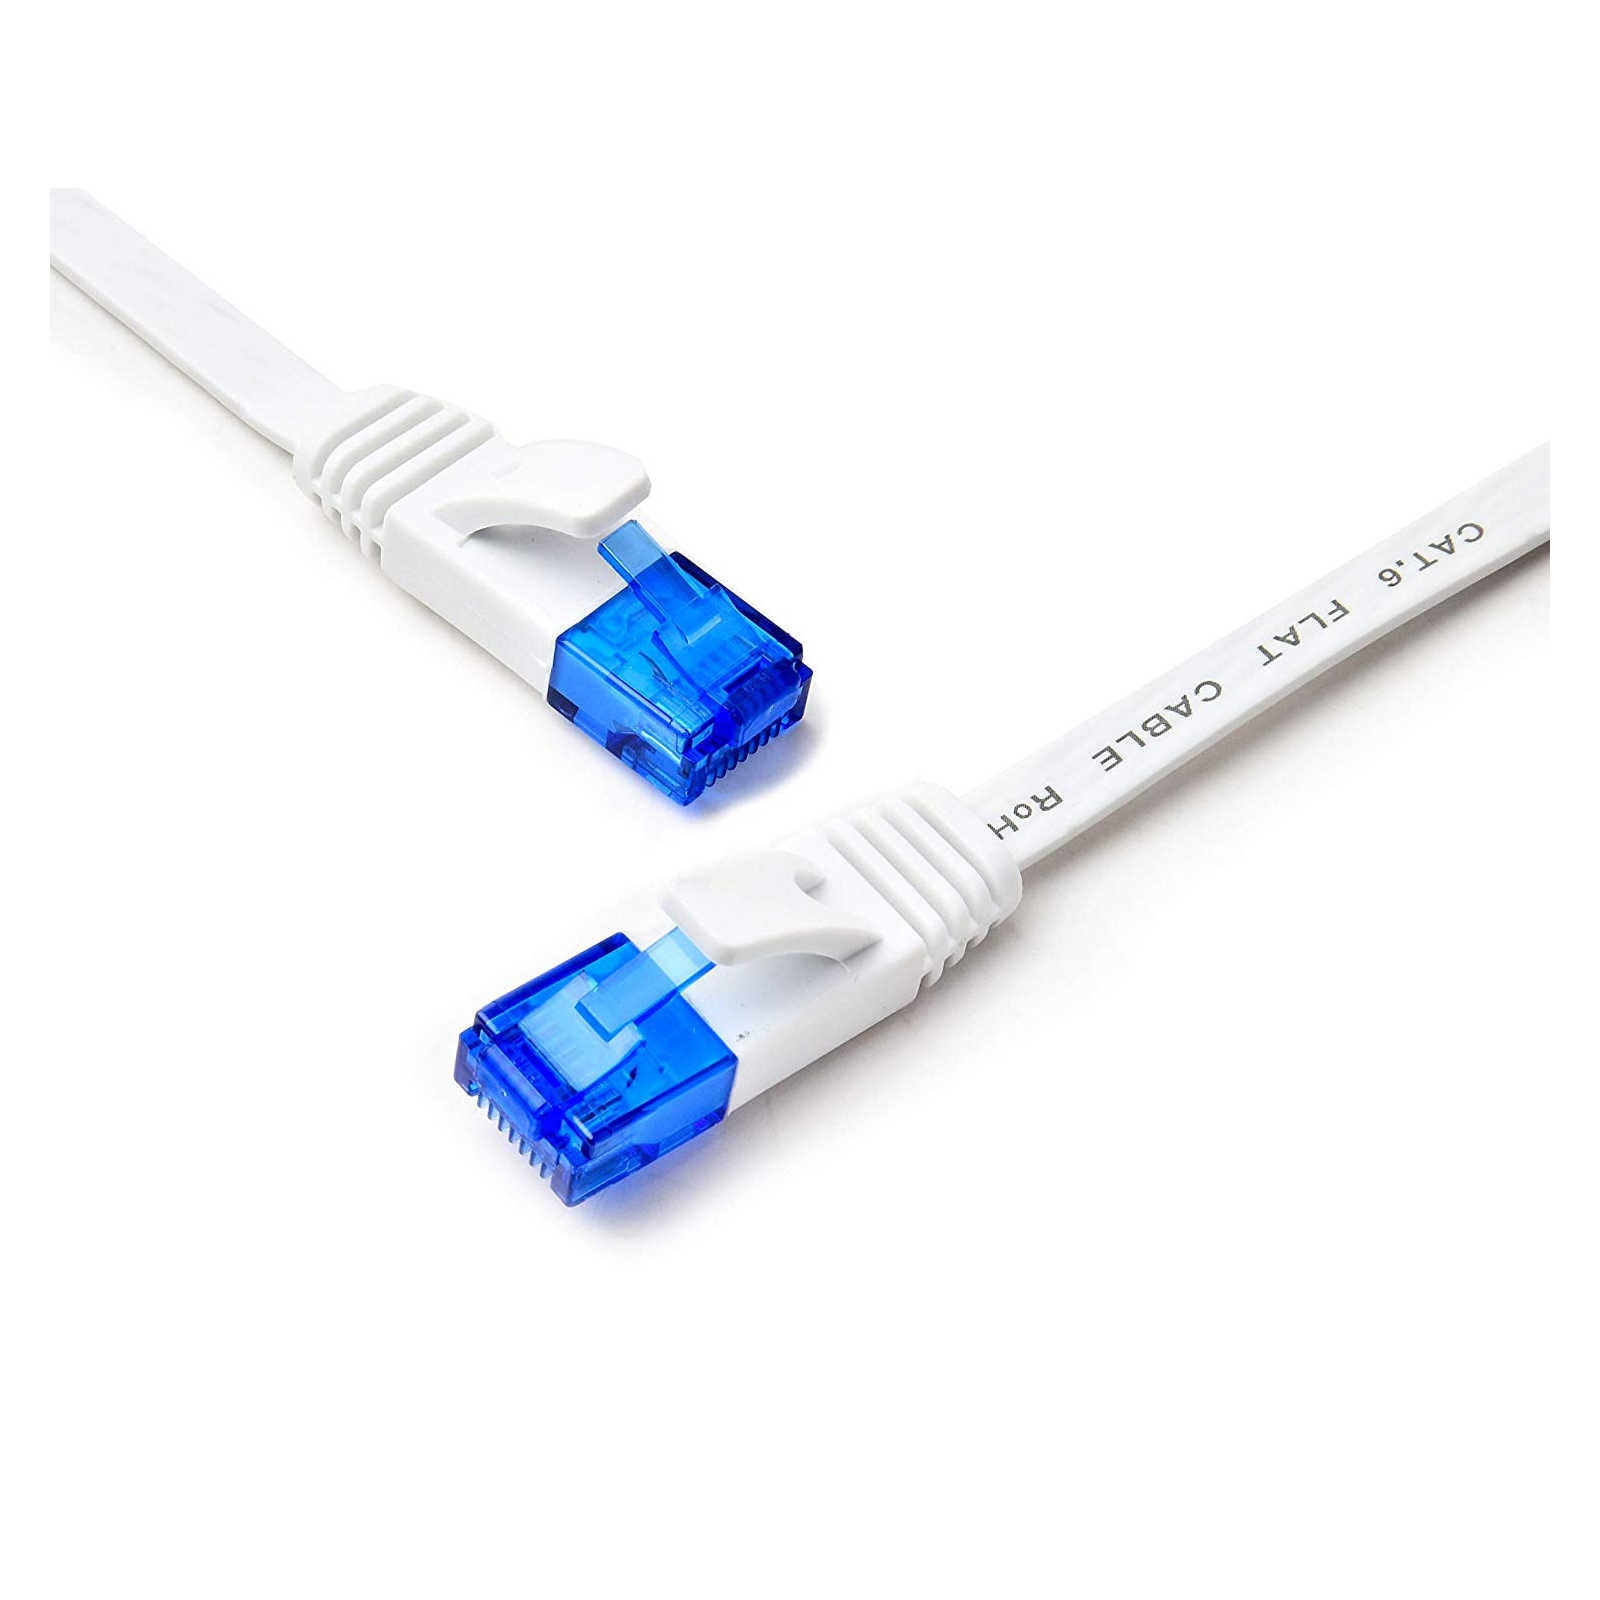 Buy BlueRigger Cat Ethernet Cable Flat Internet Network LAN Patch Cords –  Solid Cat6 High Speed Computer Wire/Cable. at Best Price in India